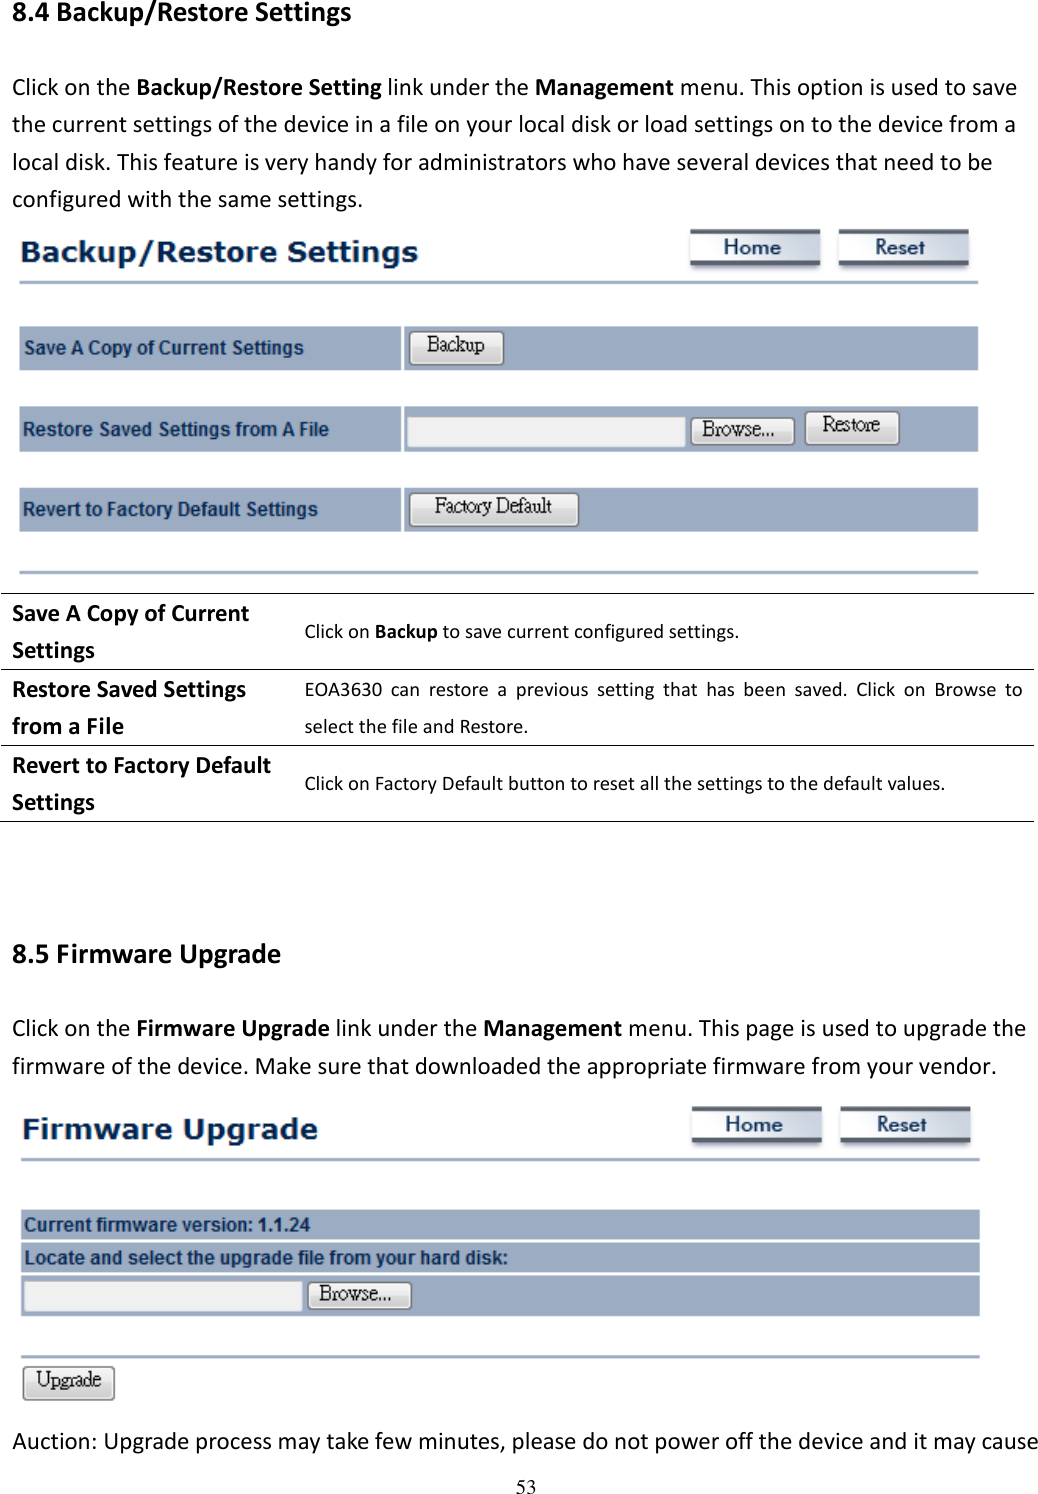   538.4 Backup/Restore Settings Click on the Backup/Restore Setting link under the Management menu. This option is used to save the current settings of the device in a file on your local disk or load settings on to the device from a local disk. This feature is very handy for administrators who have several devices that need to be configured with the same settings.  Save A Copy of Current Settings Click on Backup to save current configured settings. Restore Saved Settings from a File EOA3630  can  restore  a  previous  setting  that  has  been  saved.  Click  on  Browse  to select the file and Restore. Revert to Factory Default Settings Click on Factory Default button to reset all the settings to the default values.   8.5 Firmware Upgrade Click on the Firmware Upgrade link under the Management menu. This page is used to upgrade the firmware of the device. Make sure that downloaded the appropriate firmware from your vendor.    Auction: Upgrade process may take few minutes, please do not power off the device and it may cause 